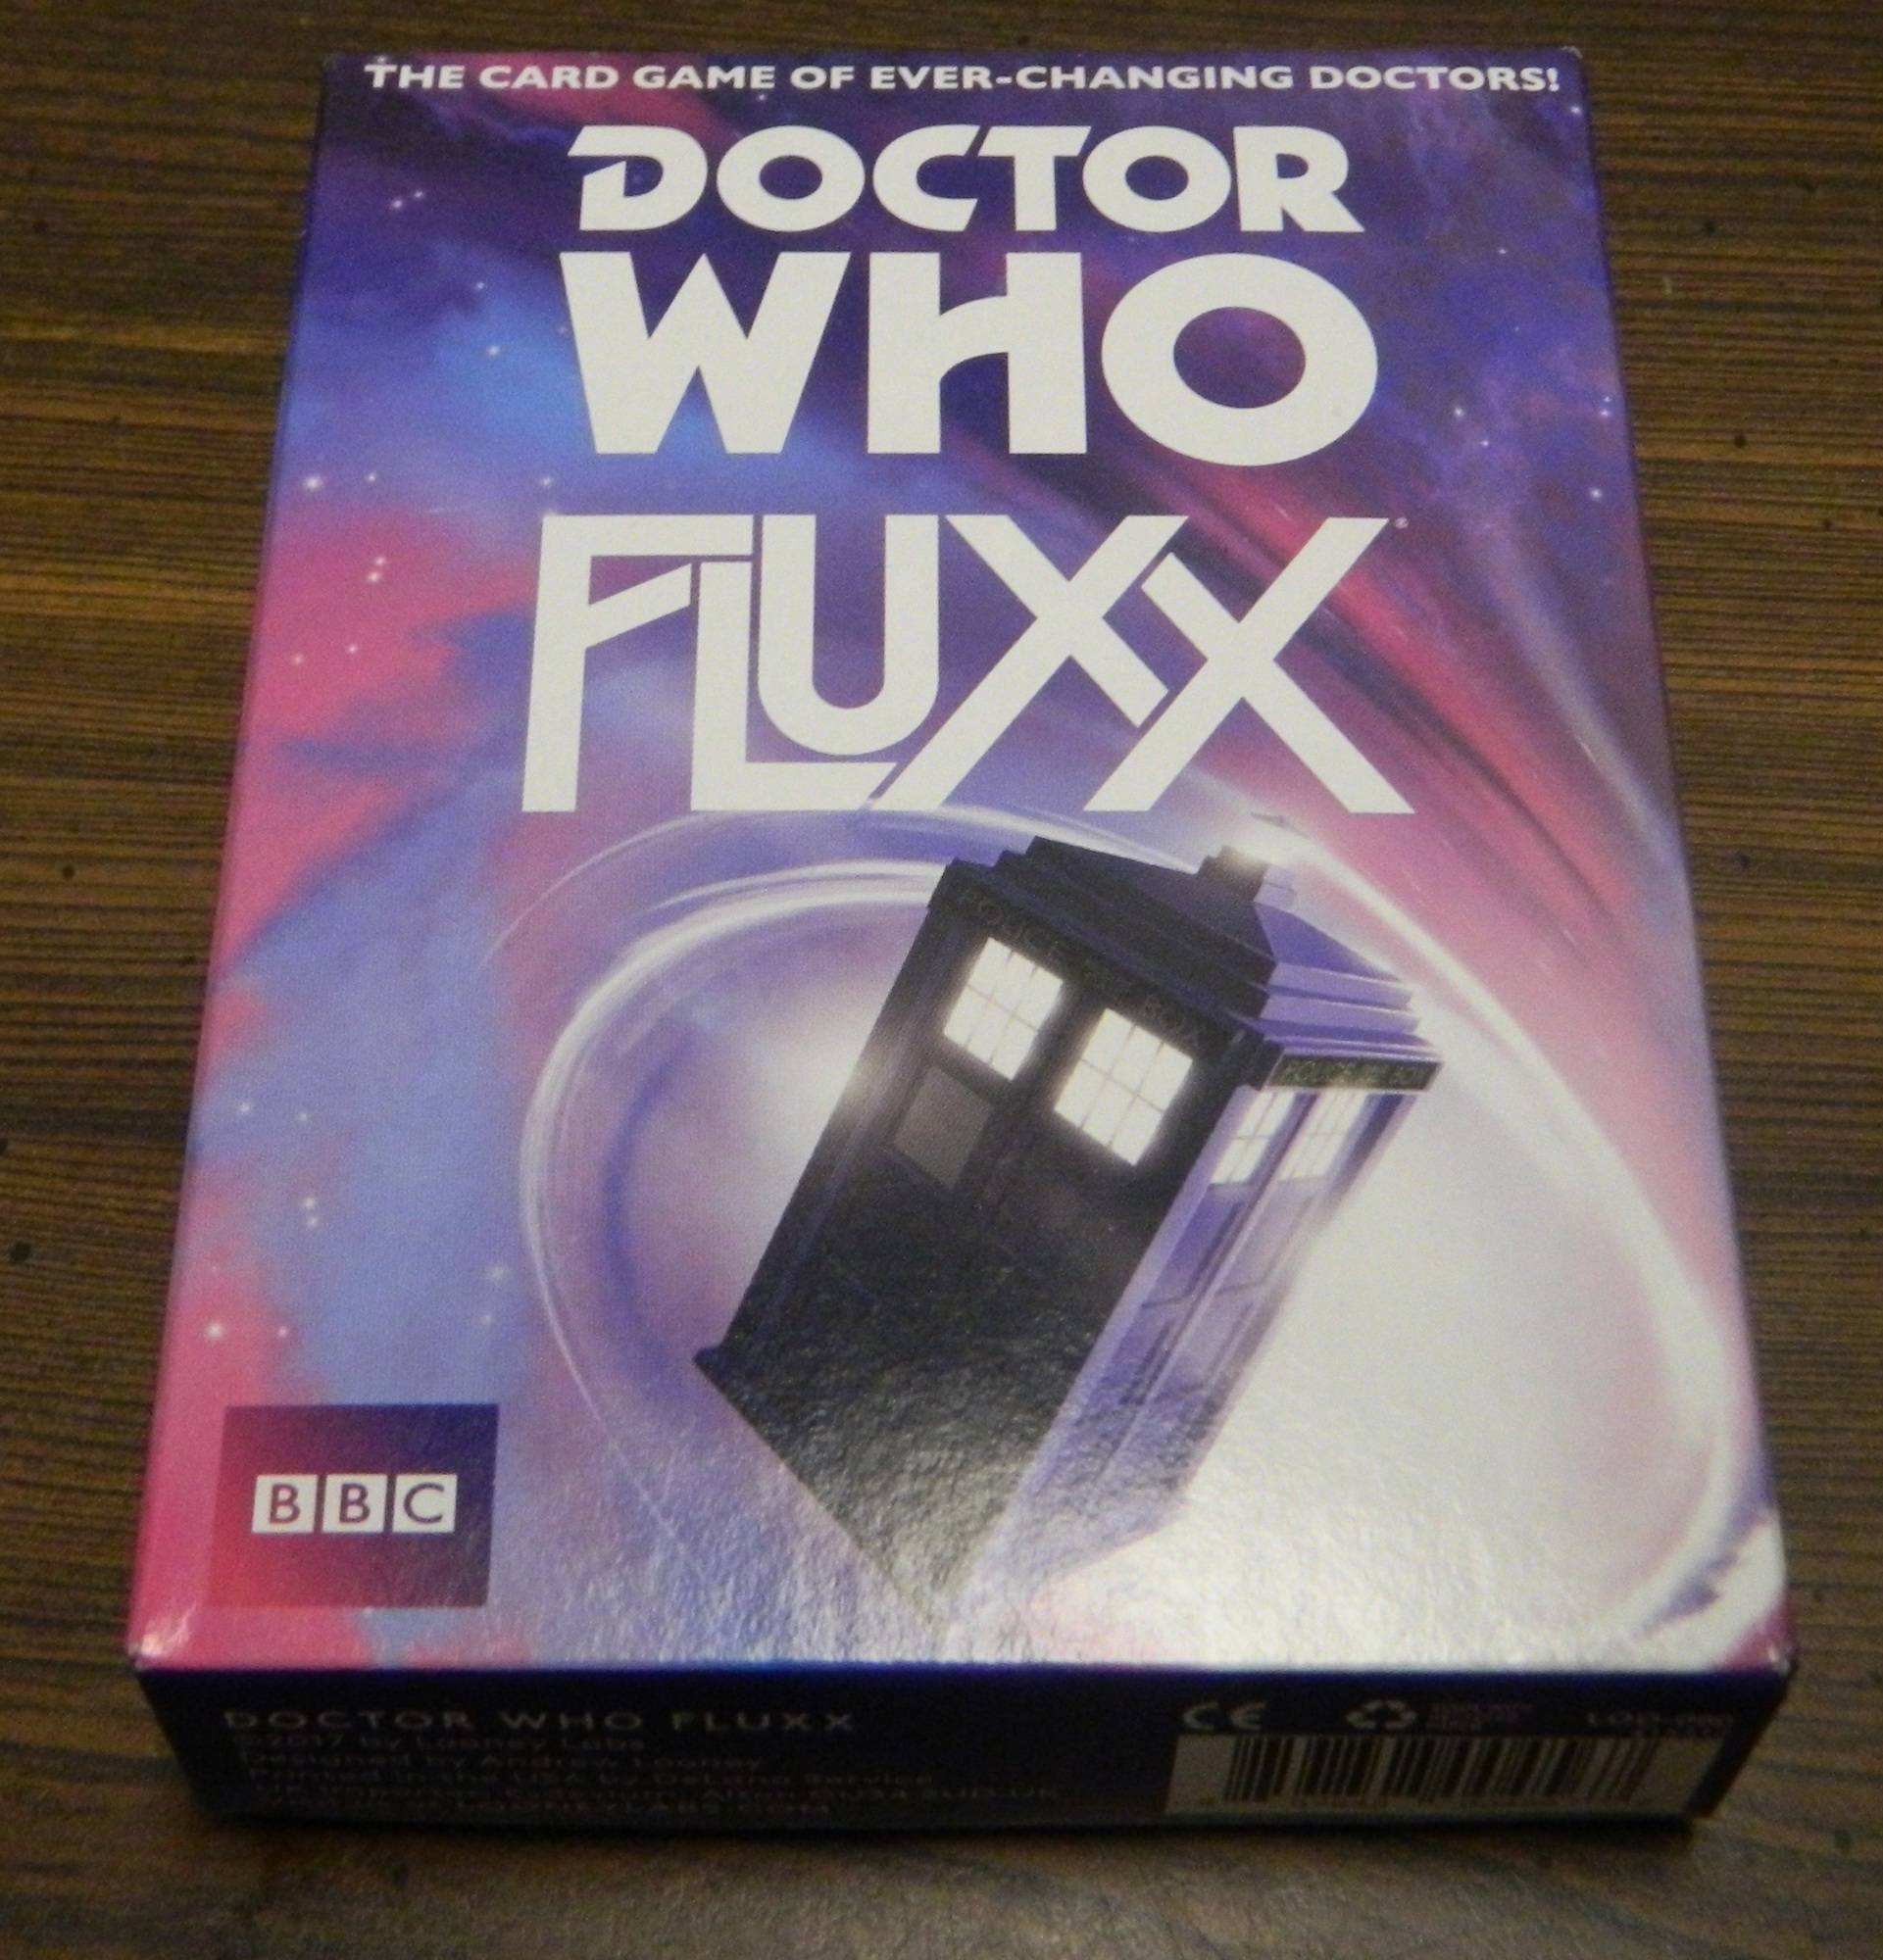 Doctor Who Fluxx Card Game Review and Rules